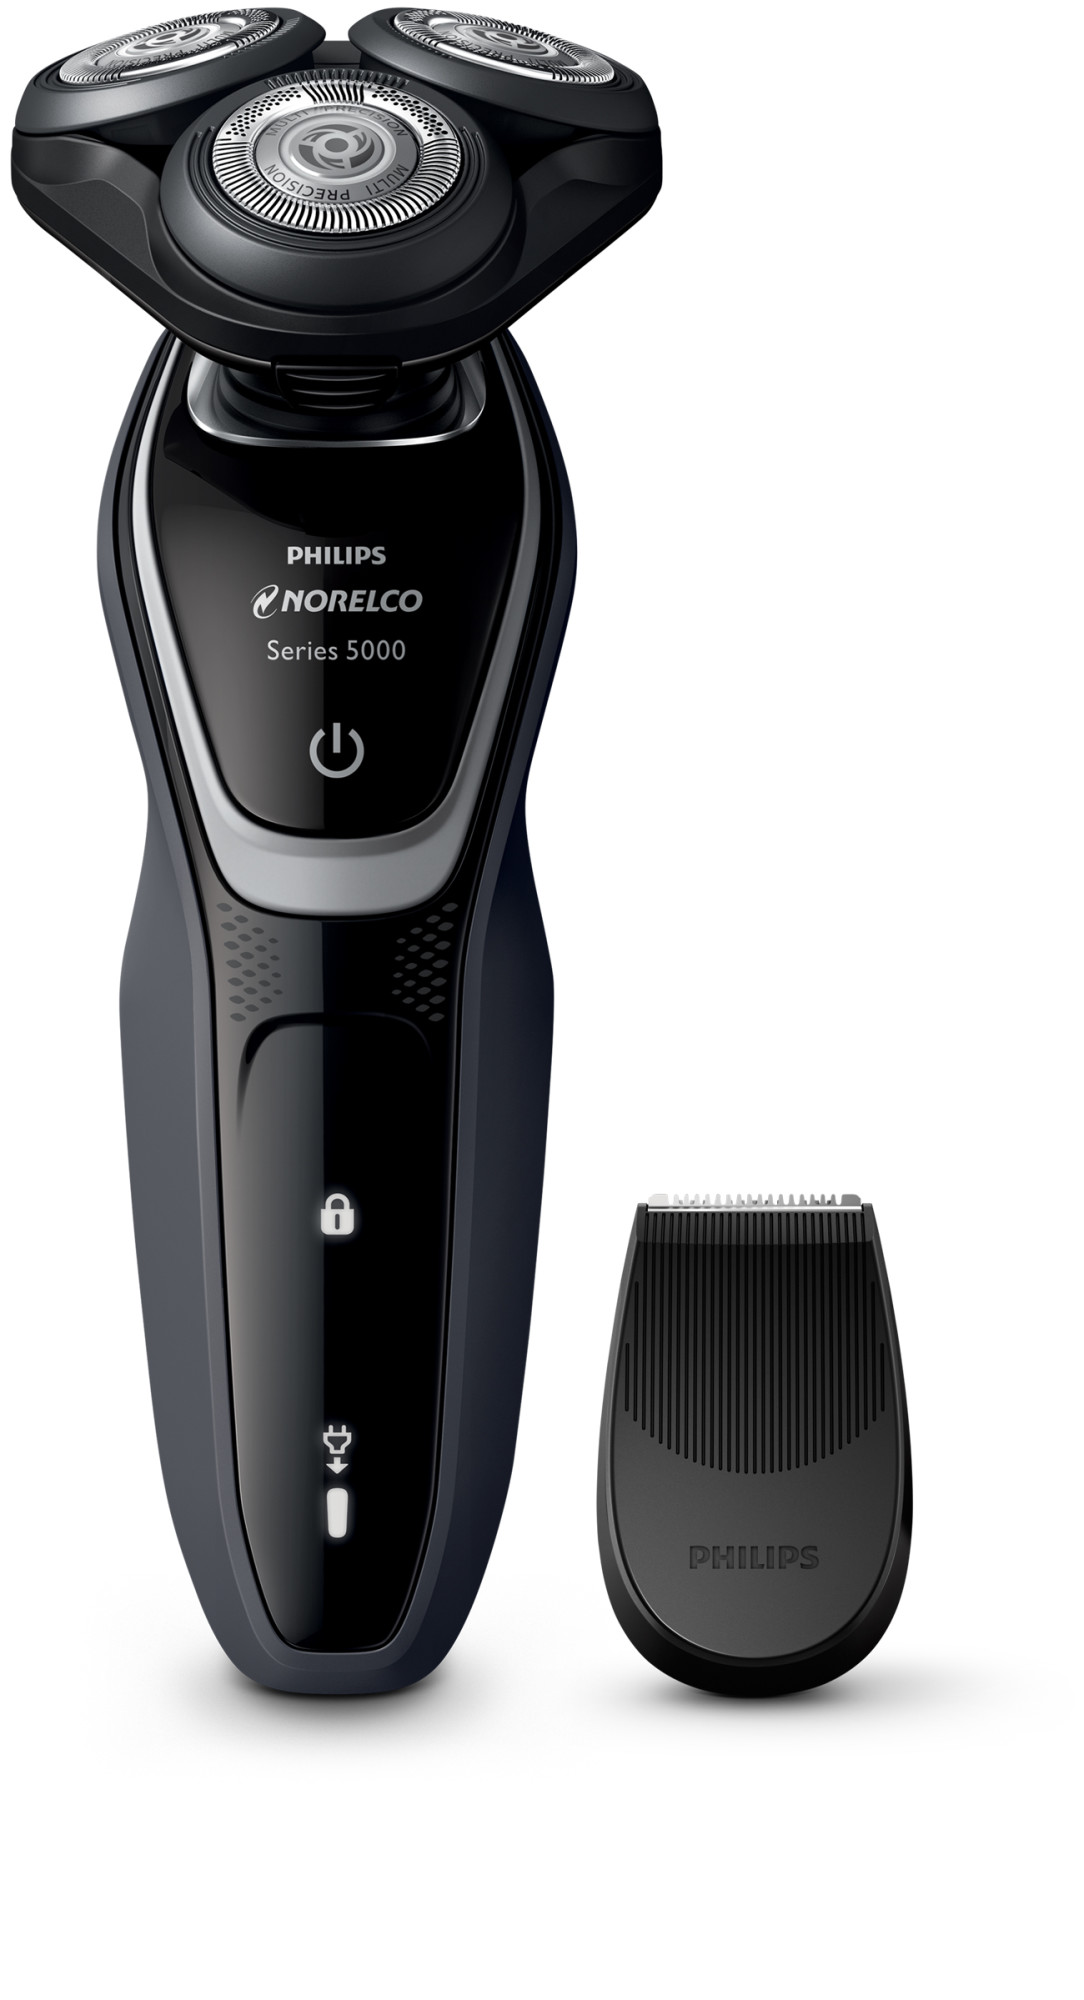 Philips Norelco 5100 Rechargeable Wet/Dry Electric Shaver S5210/81 - image 1 of 18